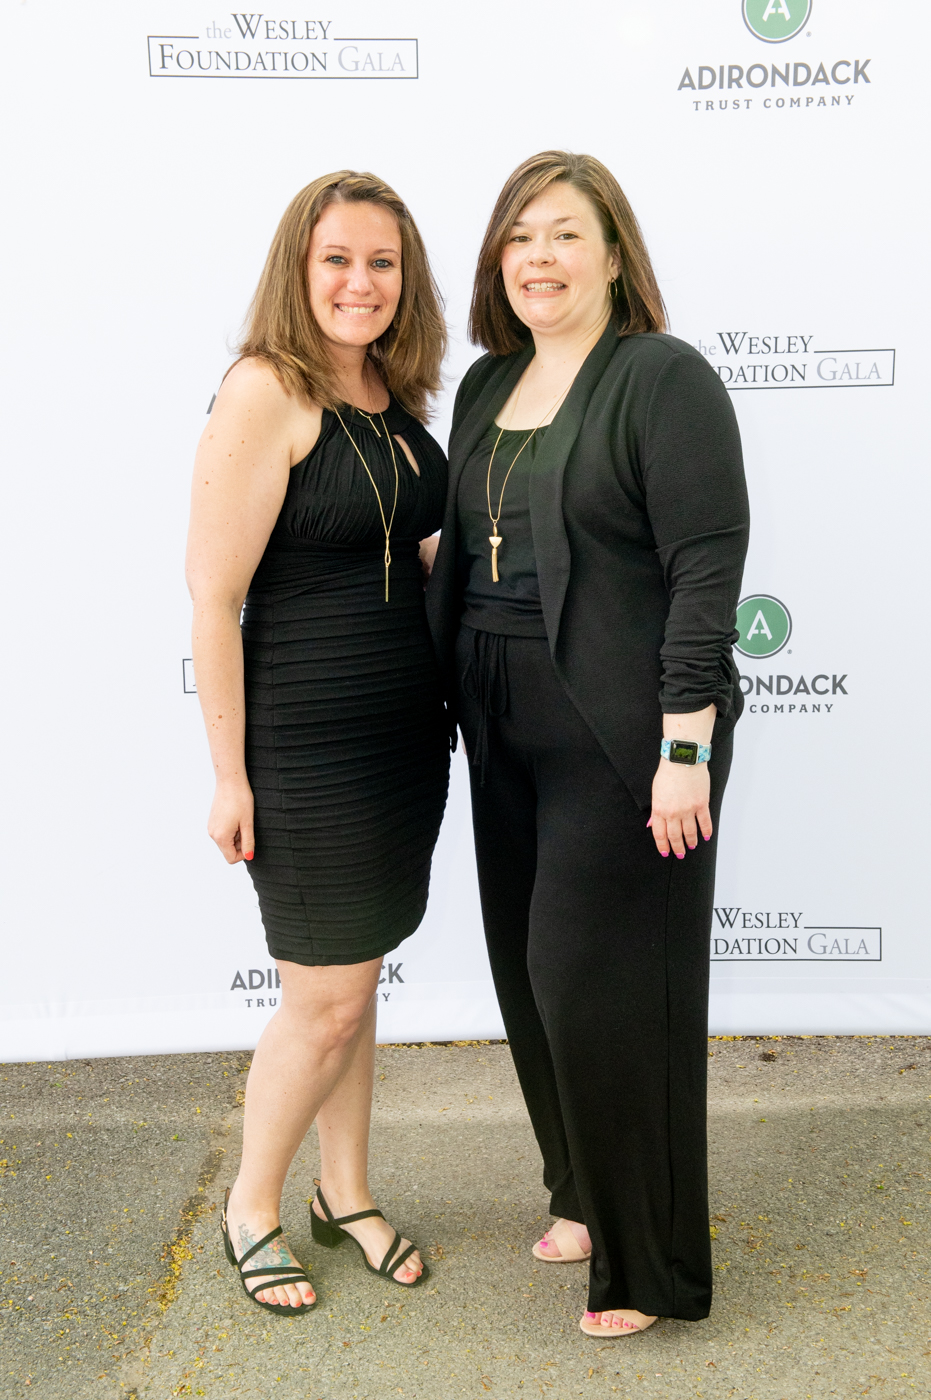 A couple posing for a picture, a woman on the left wearing a black dress and a woman on the right wearing a black dress